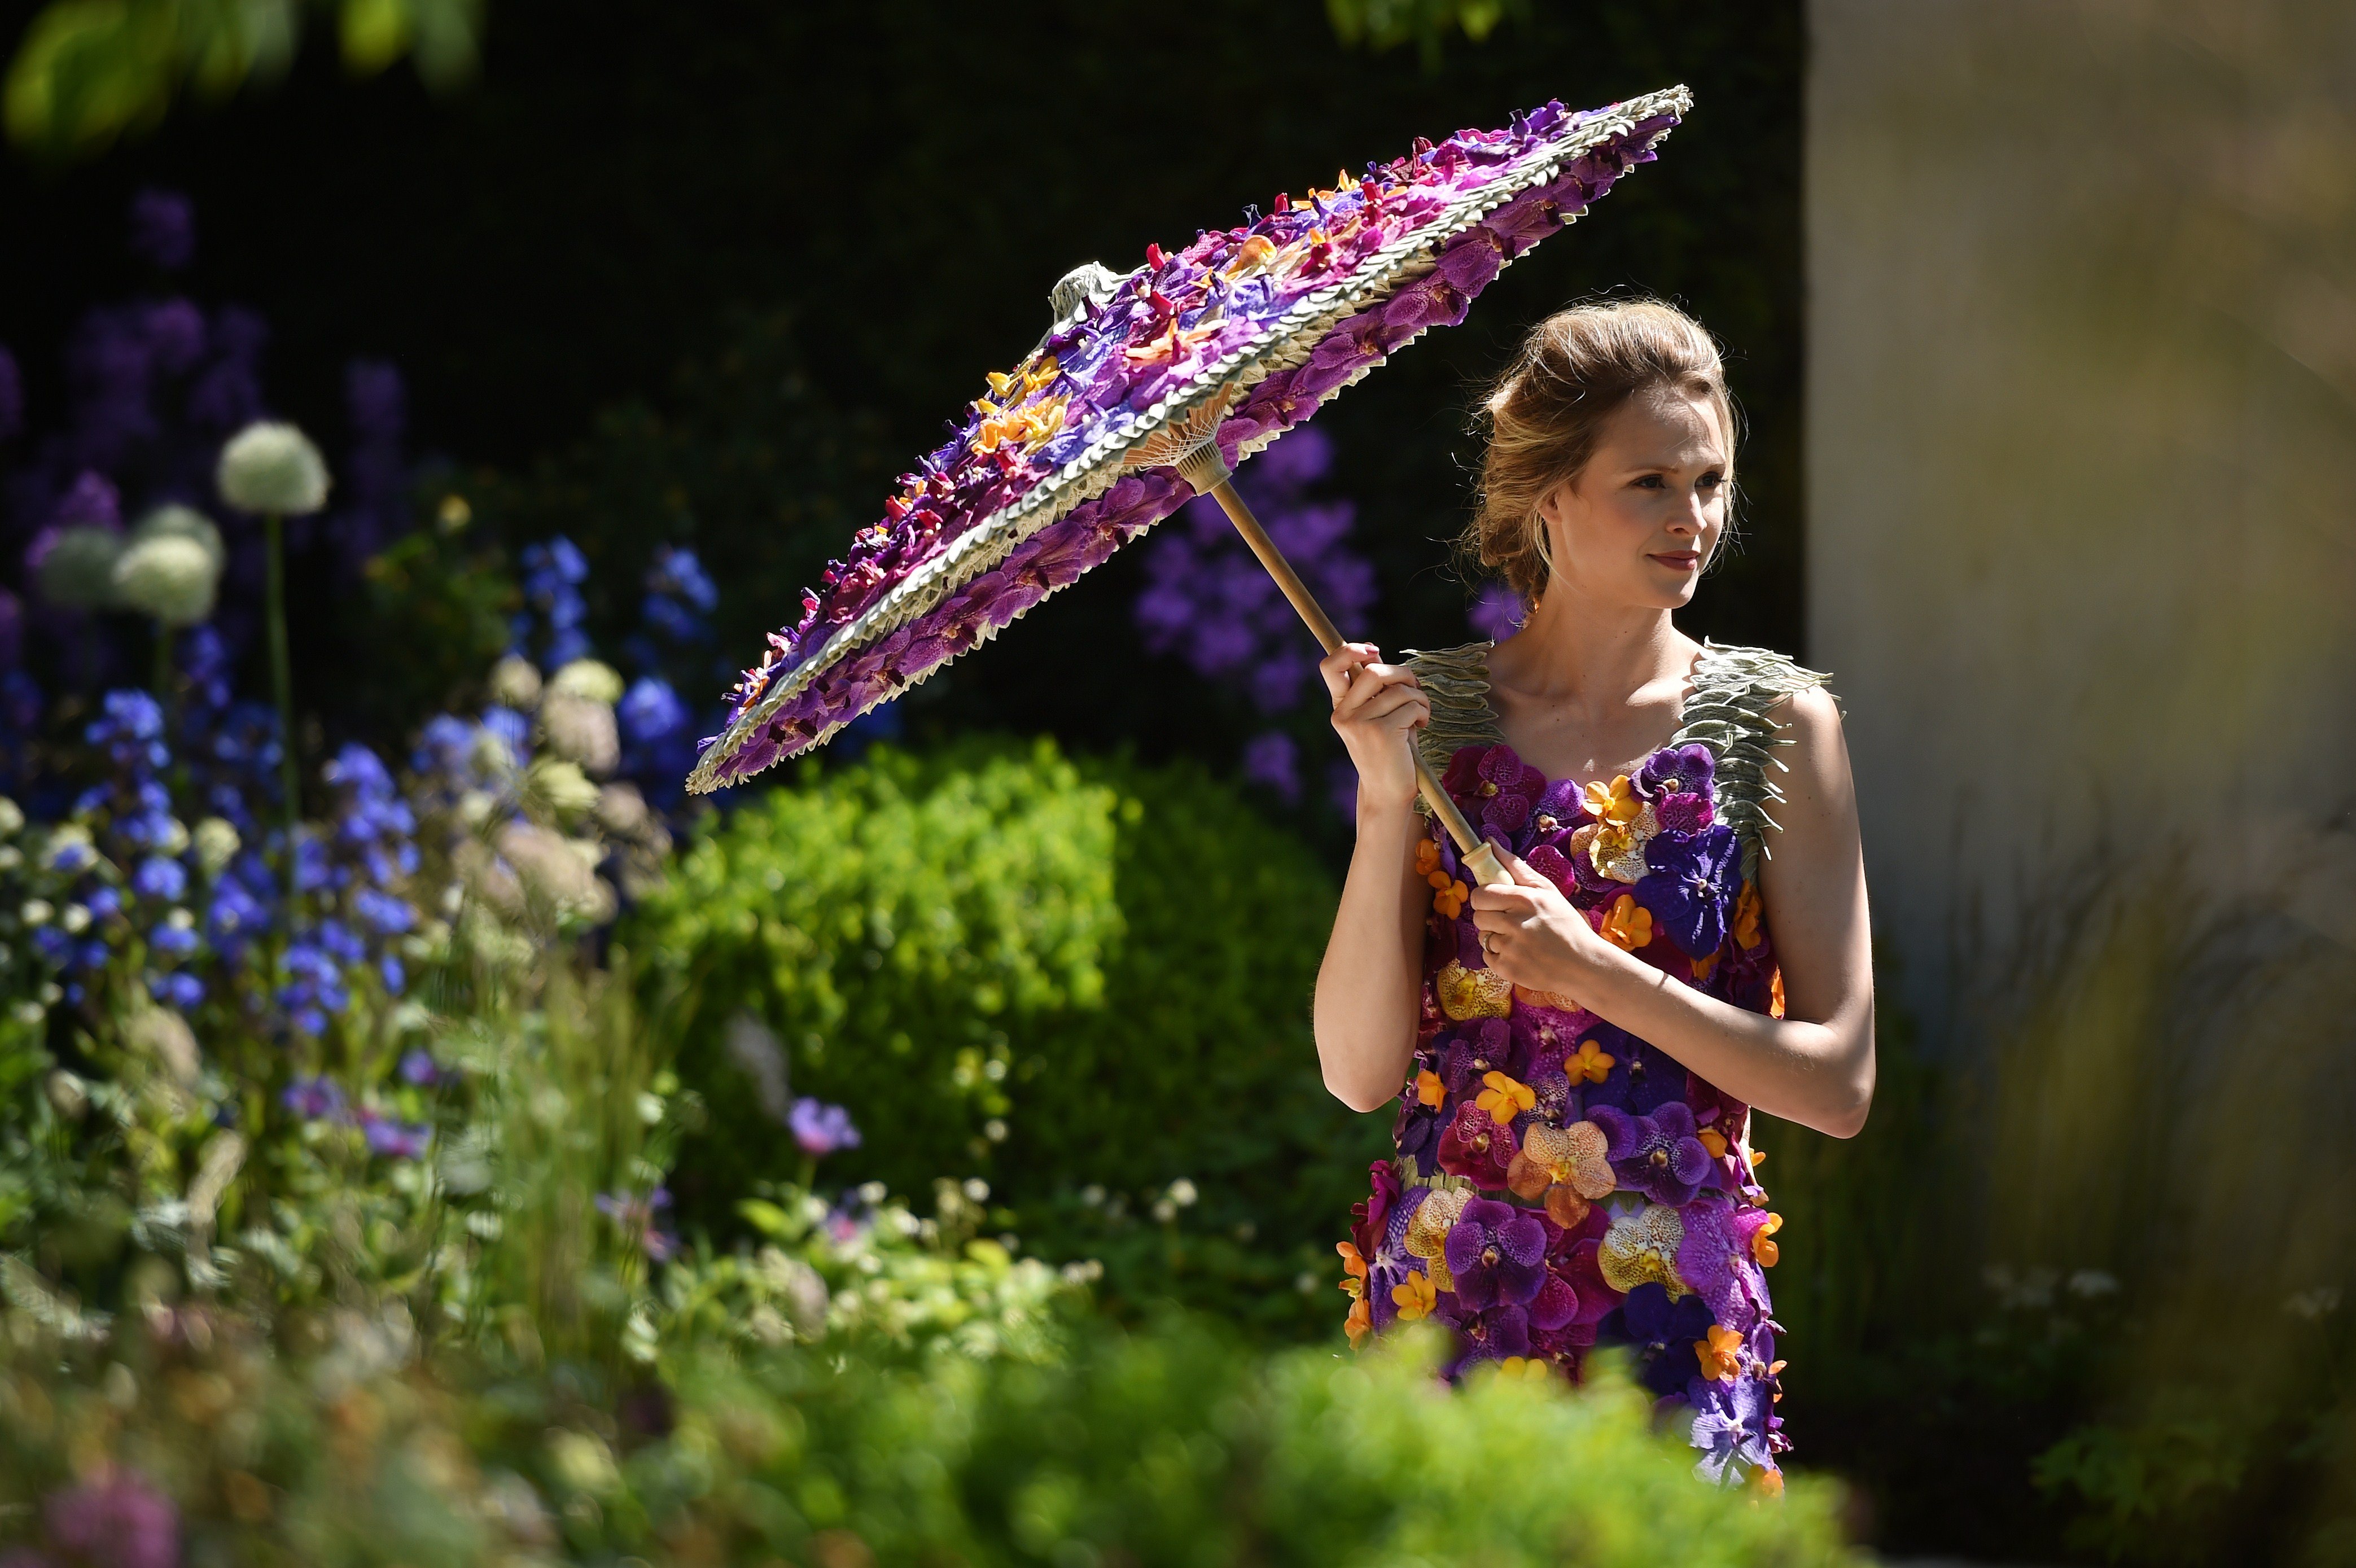 British model Nina Schubert models this year's M&G dress, made with Orchida "Vanda" heads, at the Chelsea Flower Show in west London, on May 19, 2014. | Source: Getty Images